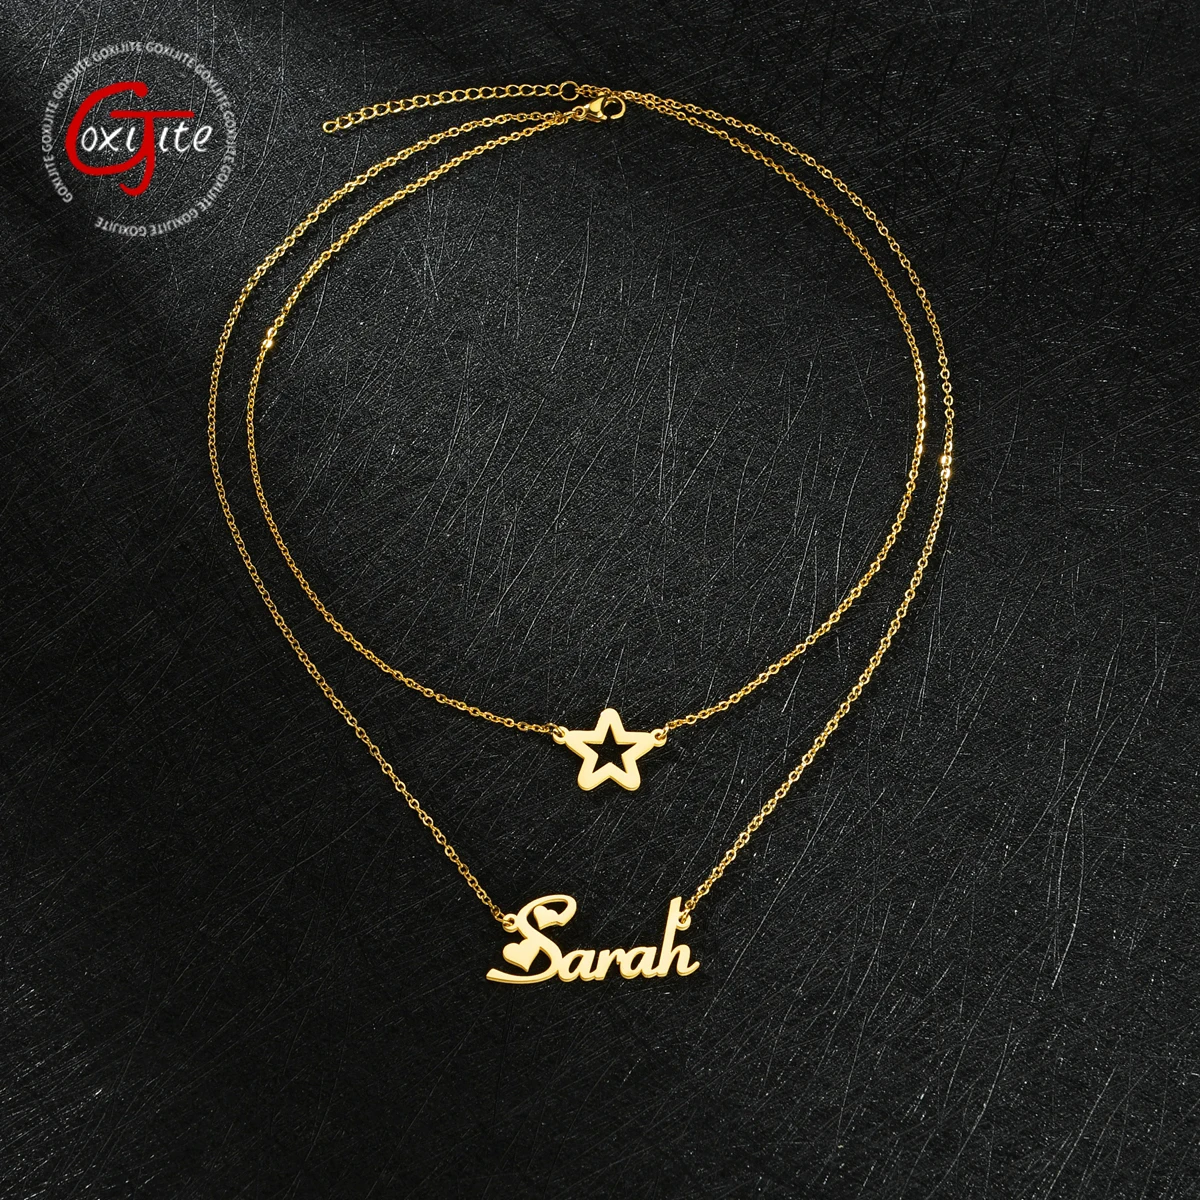 Goxijite Fashion Double Layer Name Necklace Personalized Letter Name Star Choker Necklace Jewelry Woman Gift